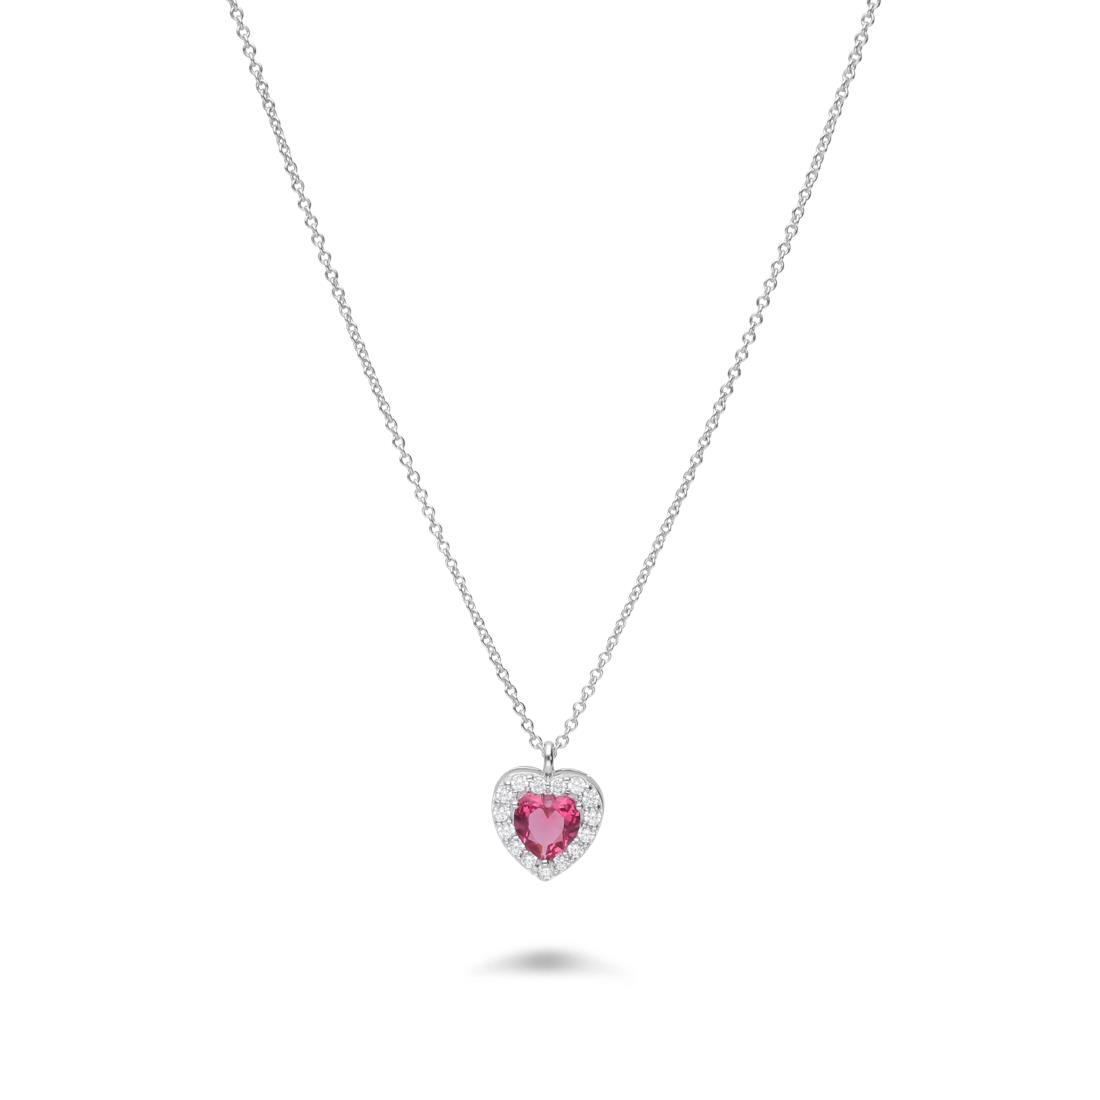 Silver necklace with heart-shaped fuchsia stone and zircons - ORO&CO 925